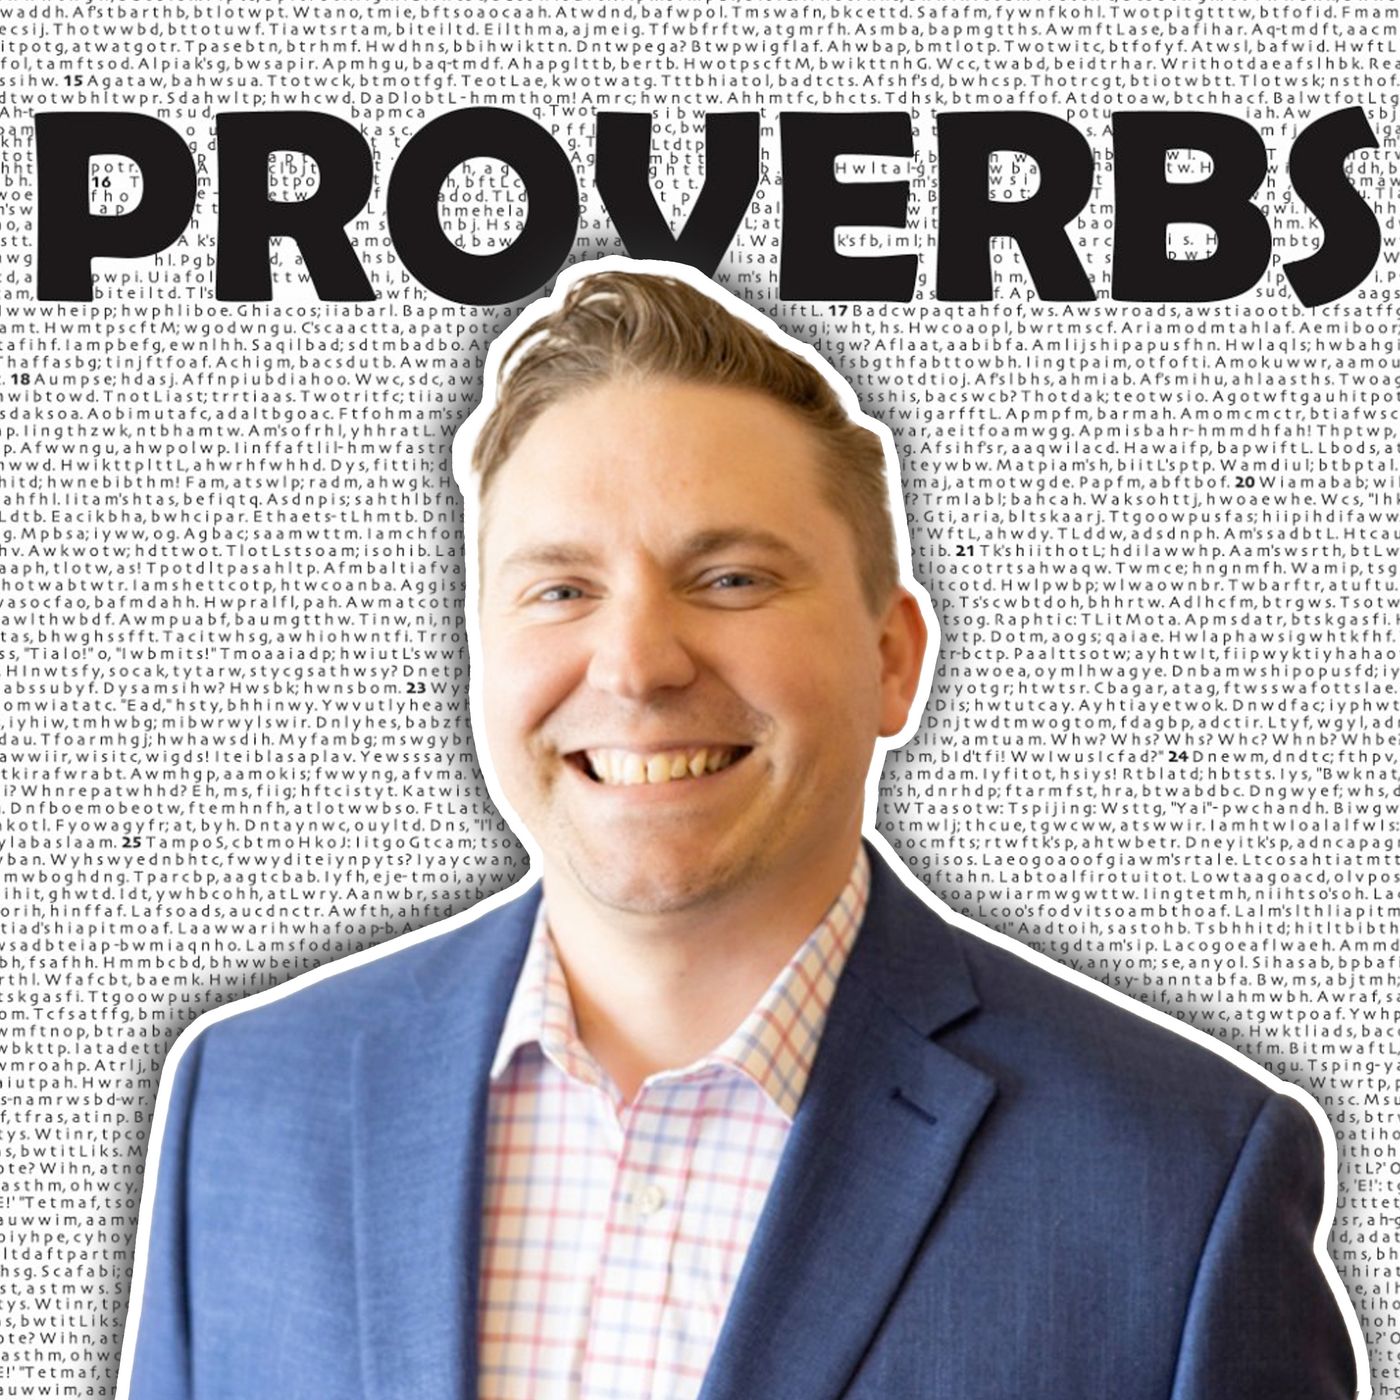 He Memorized Proverbs Word-for-Word...here’s how he did it